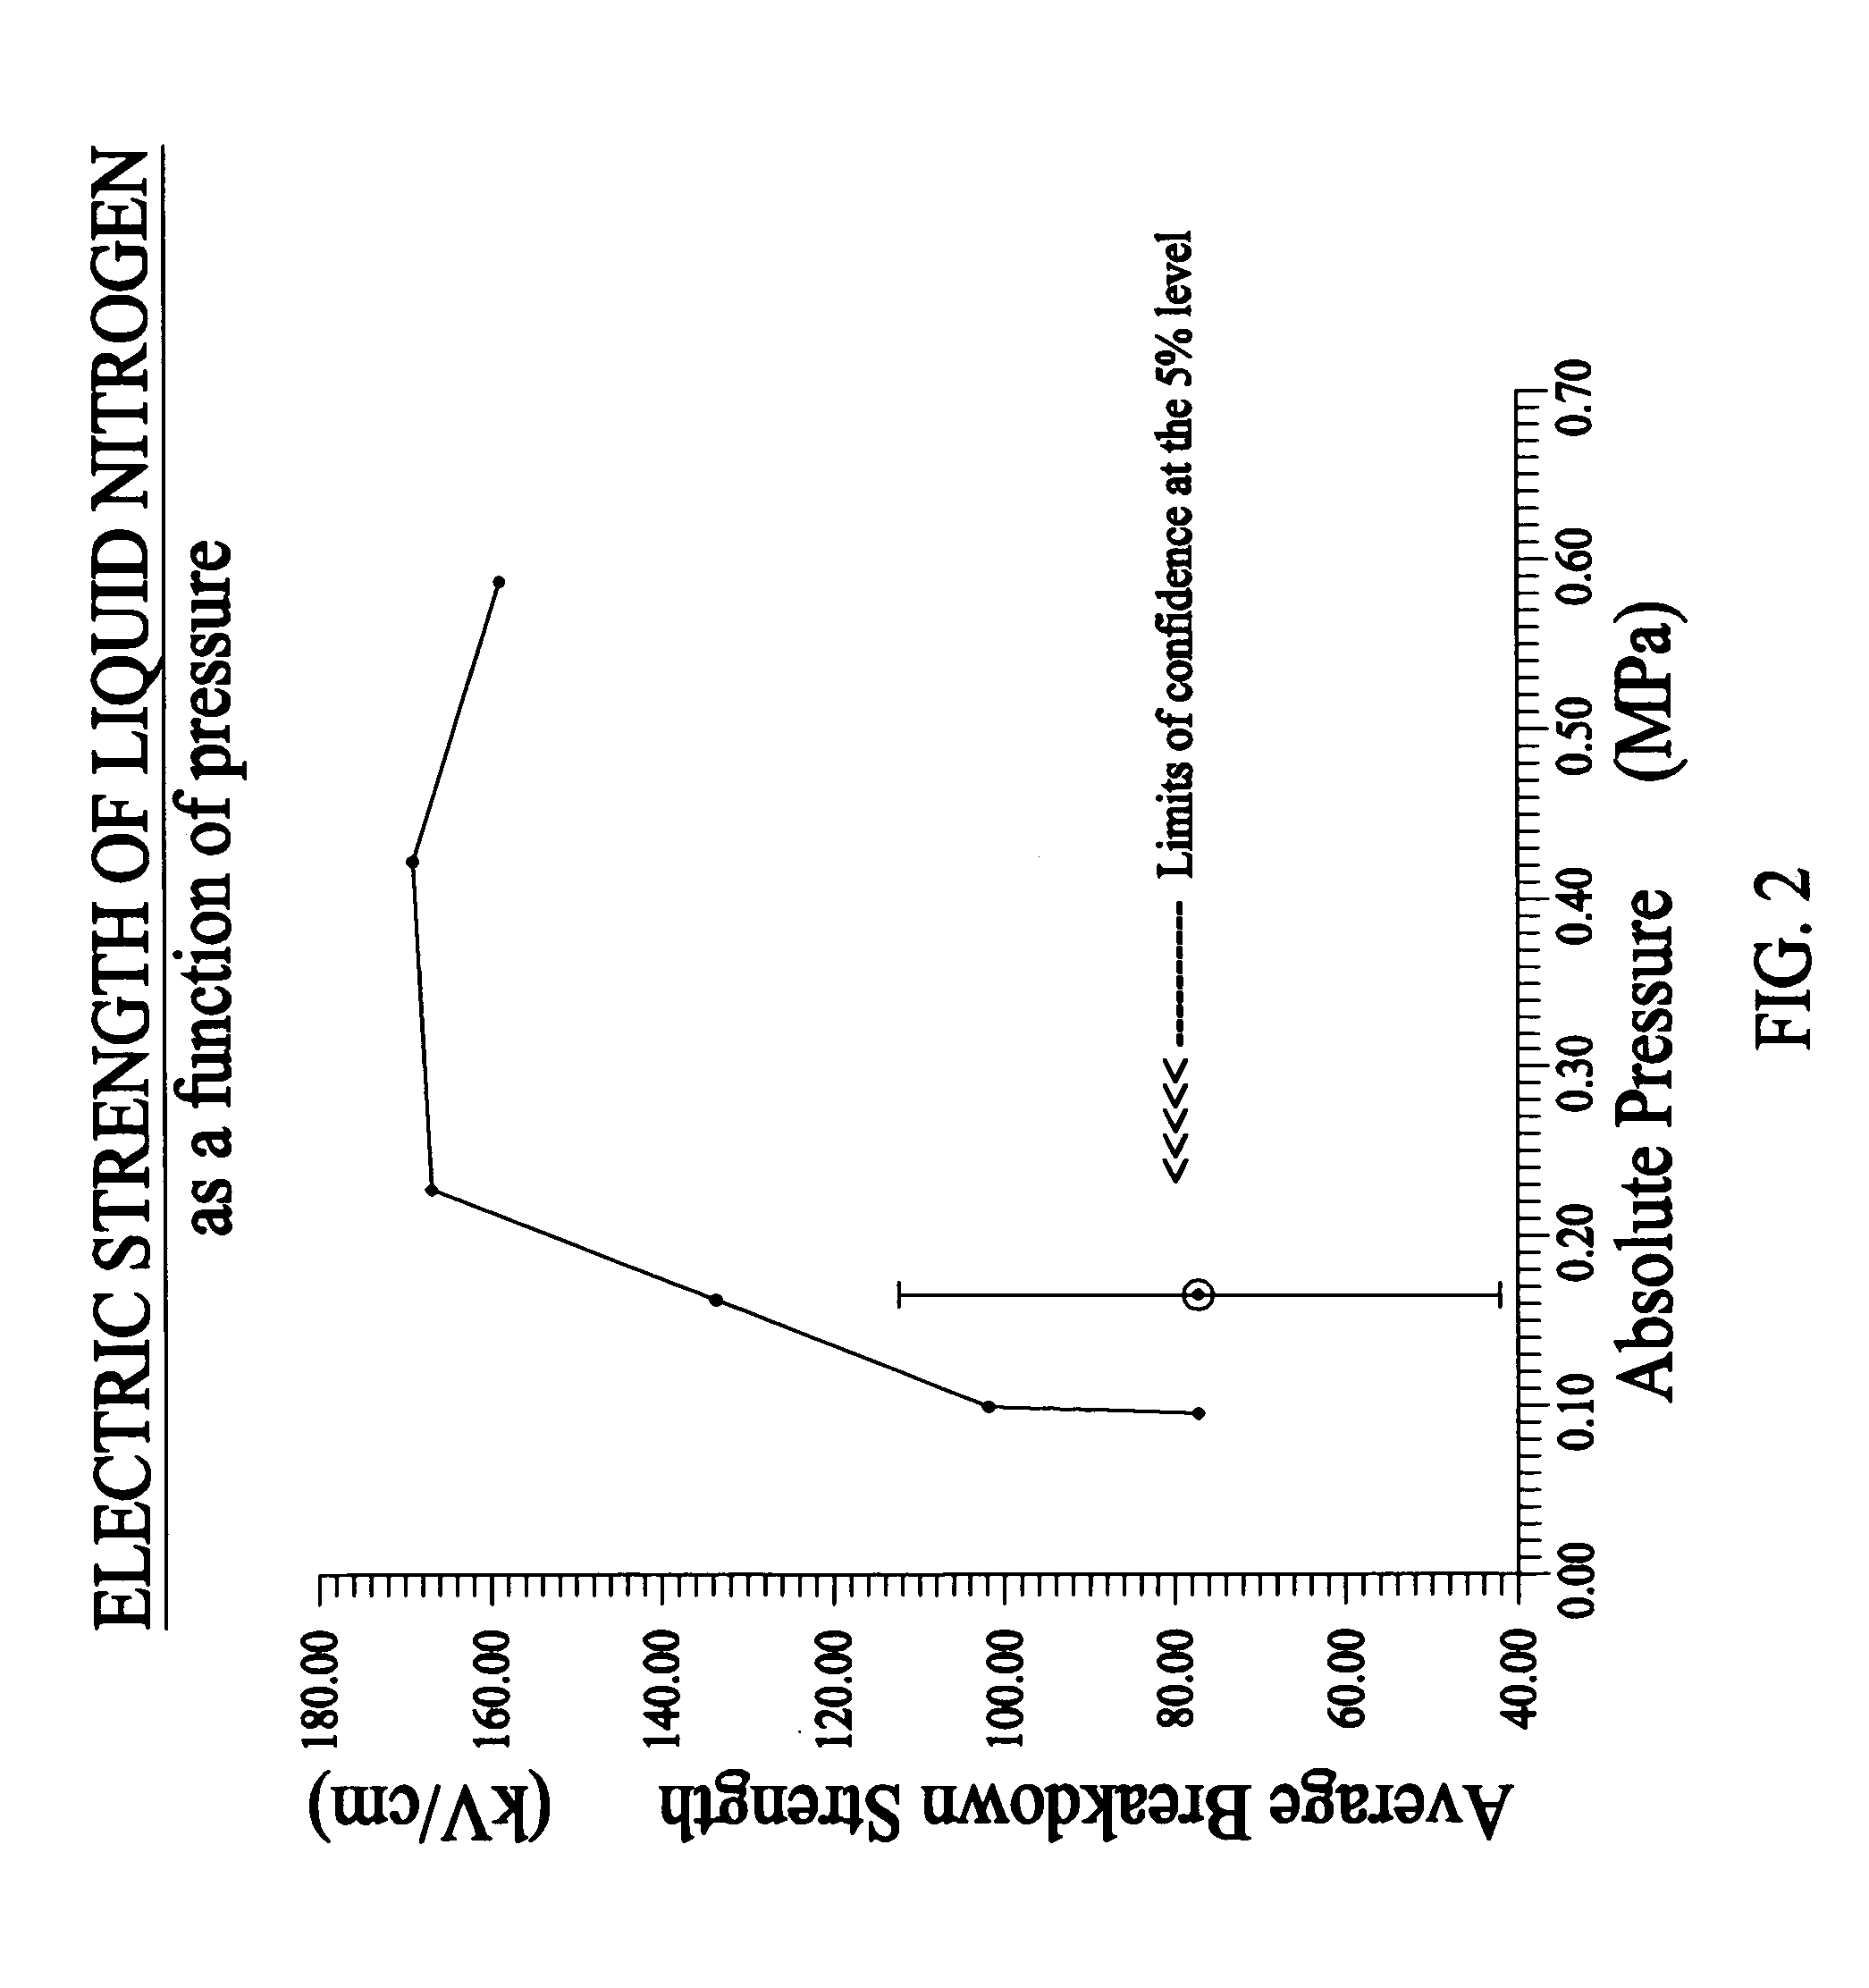 Method and apparatus of cryogenic cooling for high temperature superconductor devices